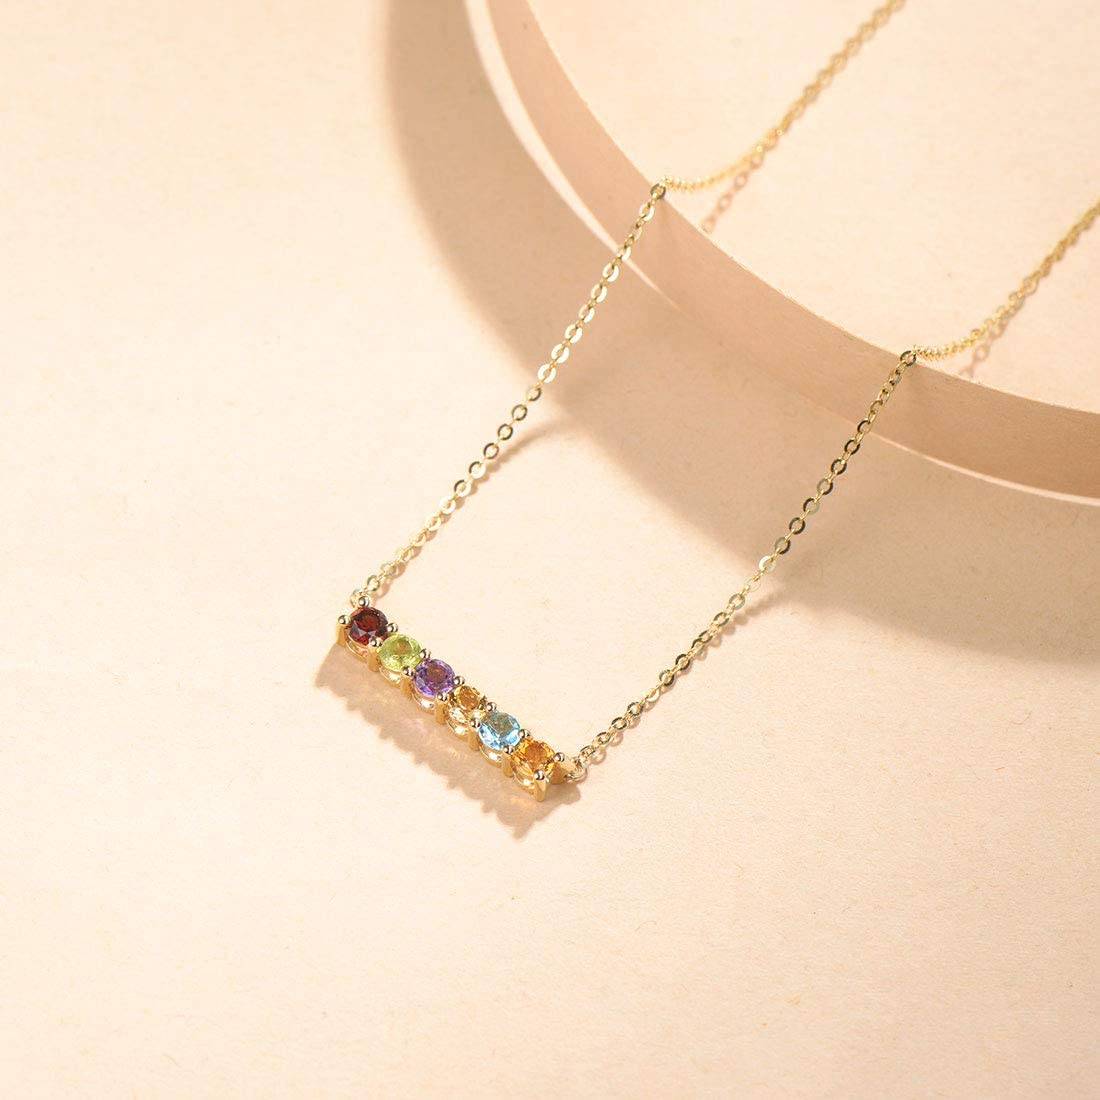 FANCIME "Star Bar" Multicolored Gemstone Bar 14K Yellow Gold Necklace Detail